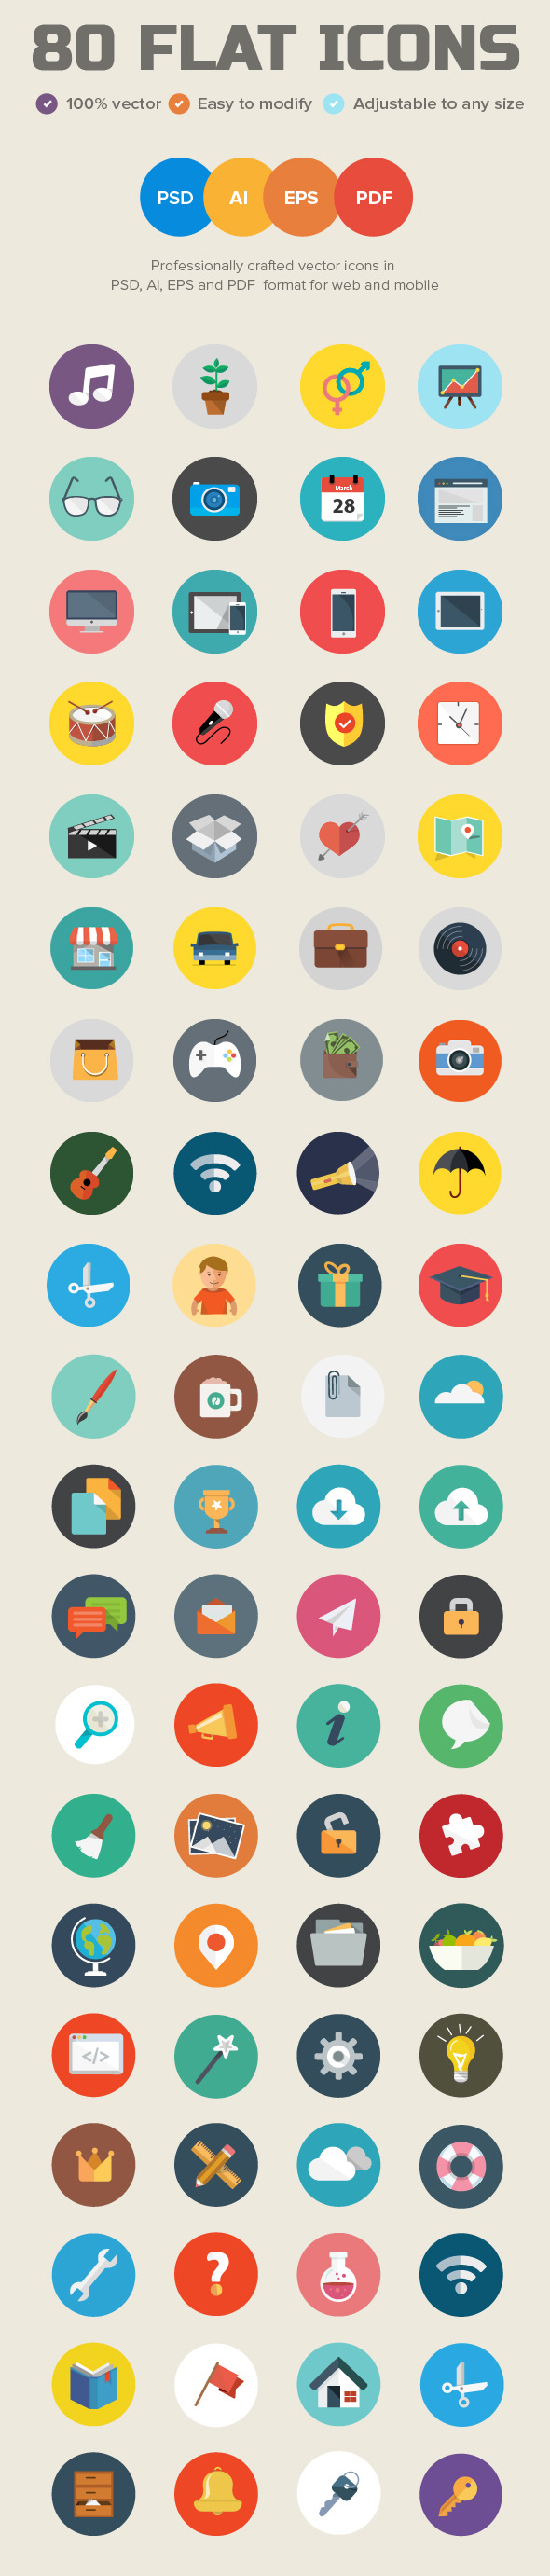 80 Flat Icons for Web & Mobile